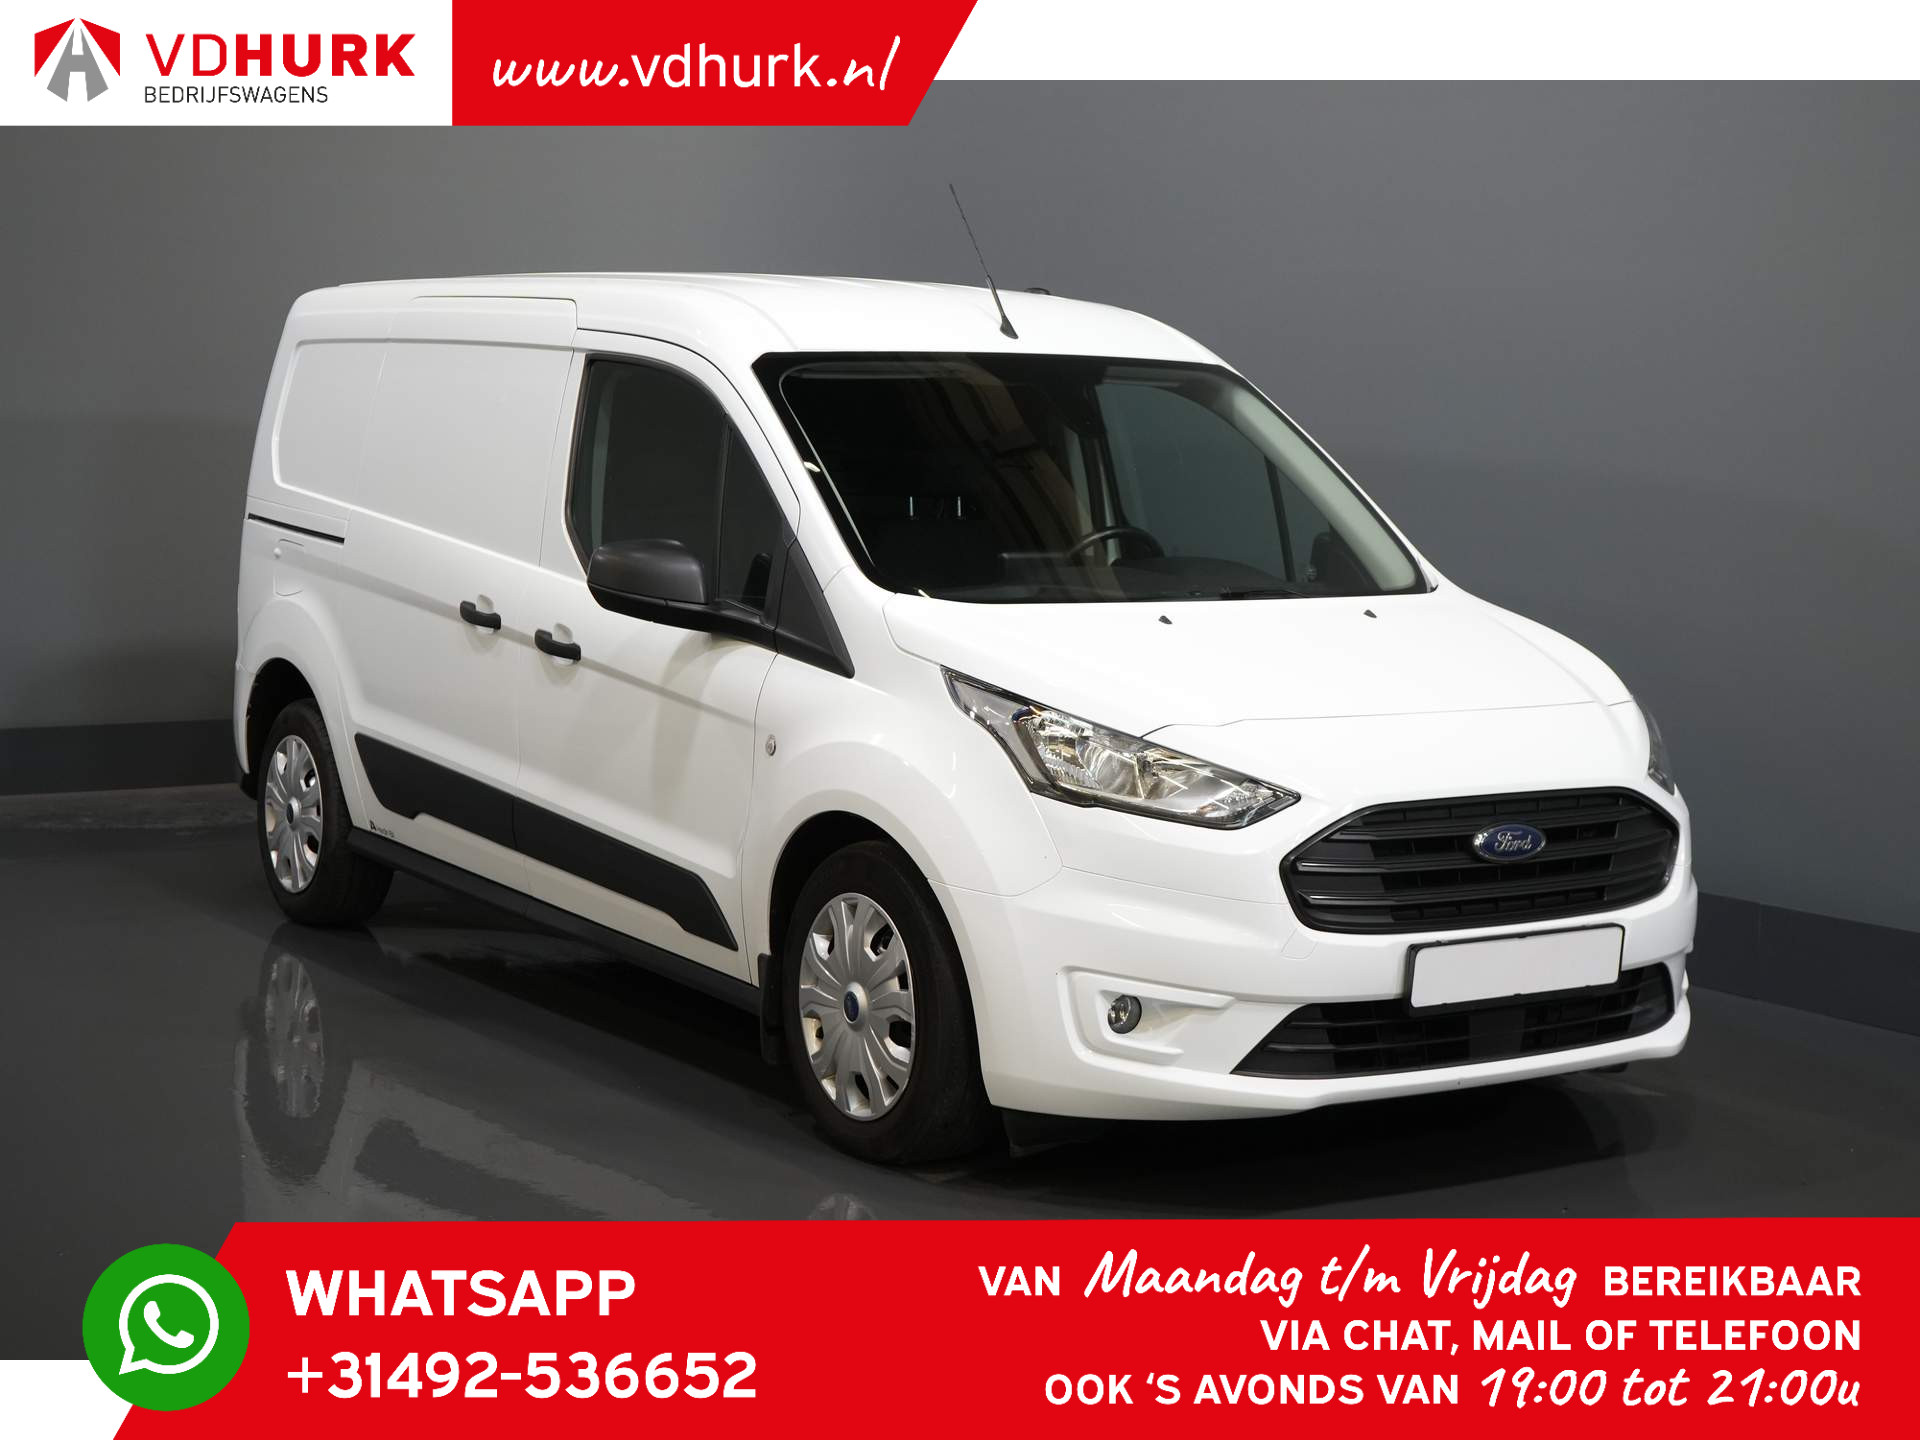 Ford Transit Connect L2 1.5 TDCI 100 pk Aut. 3pers./ Standkachel/ Stoelverw./ DAB/ Carplay/ PDC/ Camera/ Trekhaak/ Cruise/ Airco